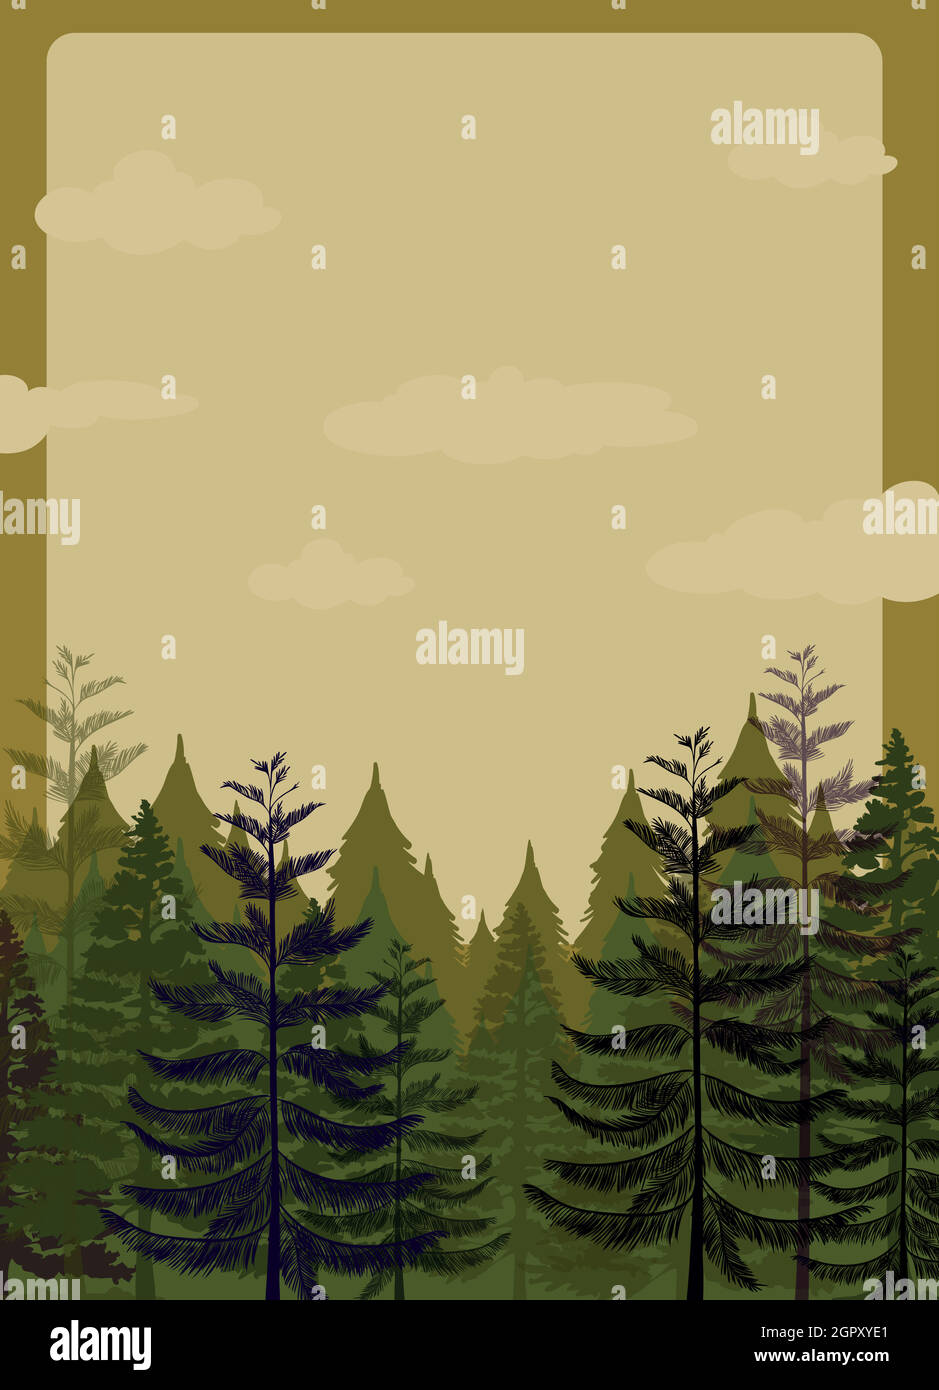 Border design with pine forest Stock Vector